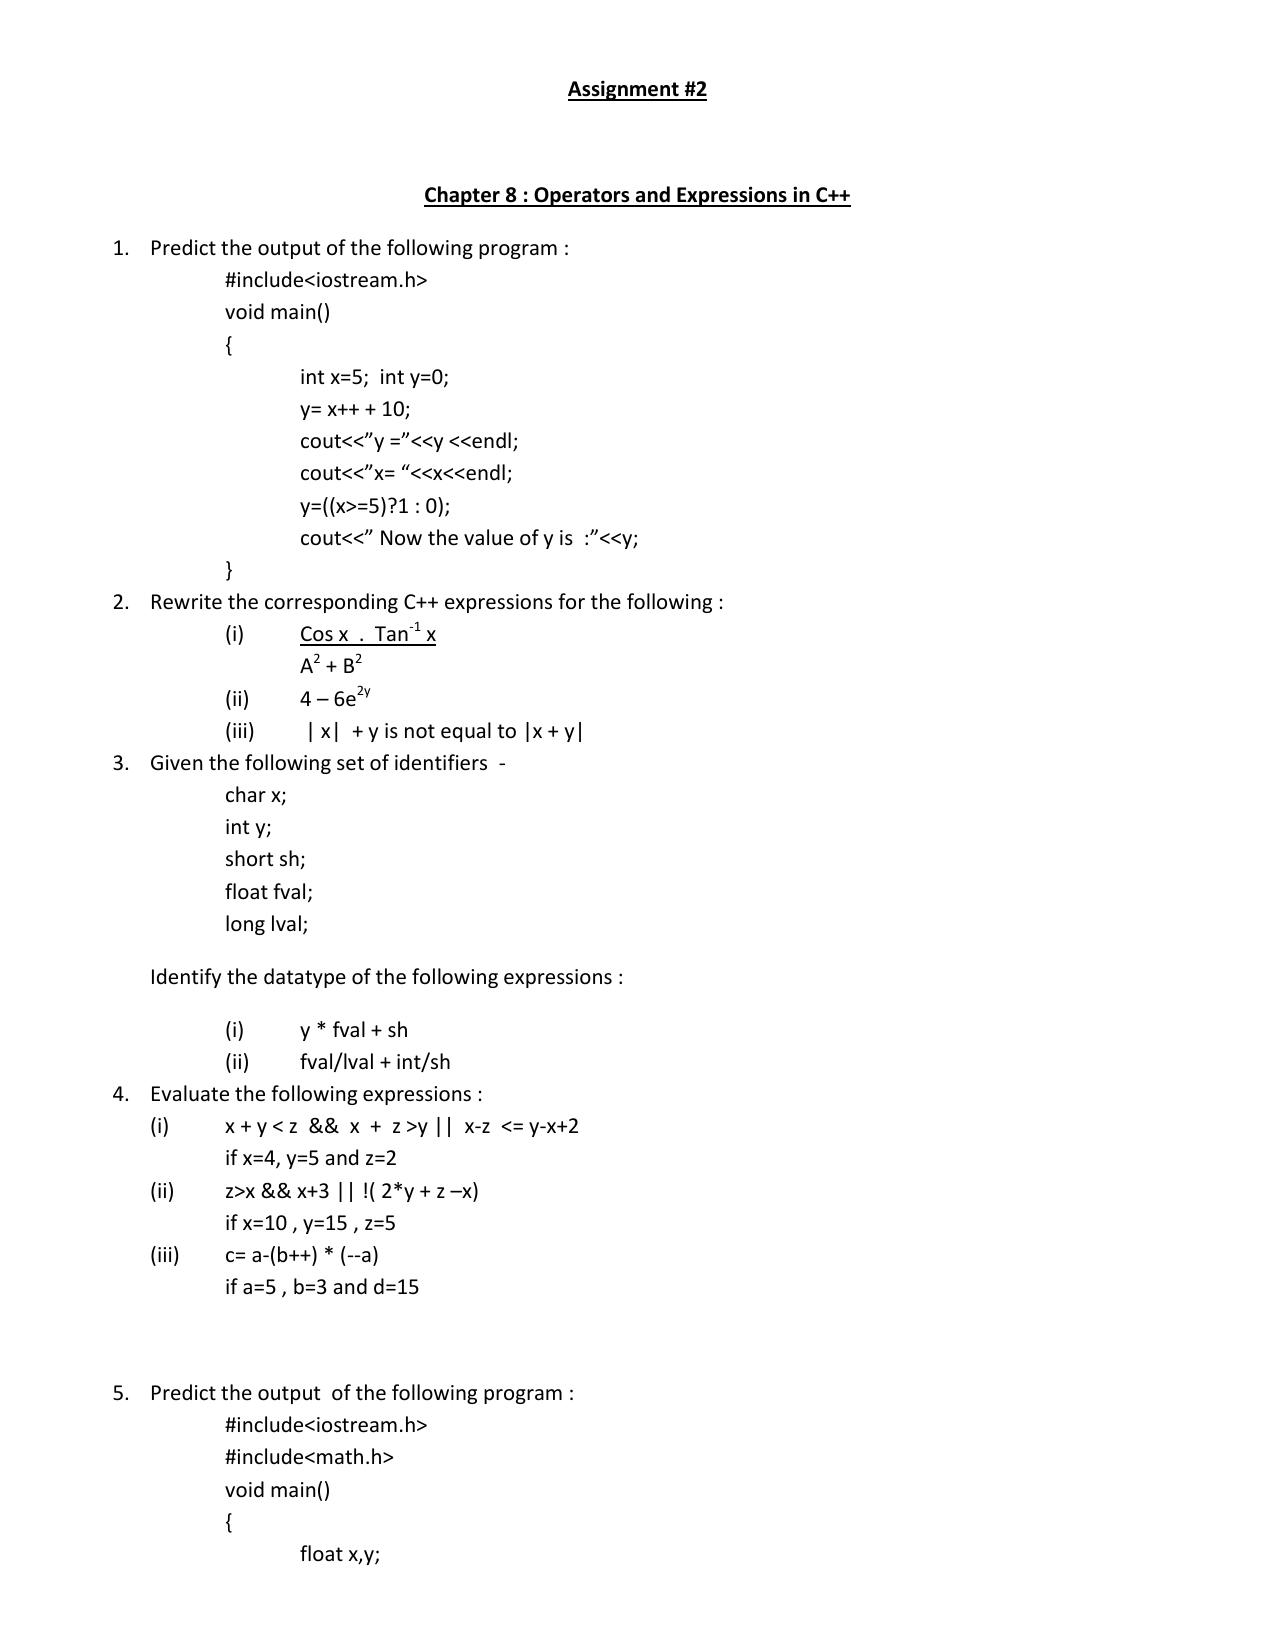 CBSE Worksheets for Class 11 Computer Science Operators and Expressions in C++ Assignment - Page 1